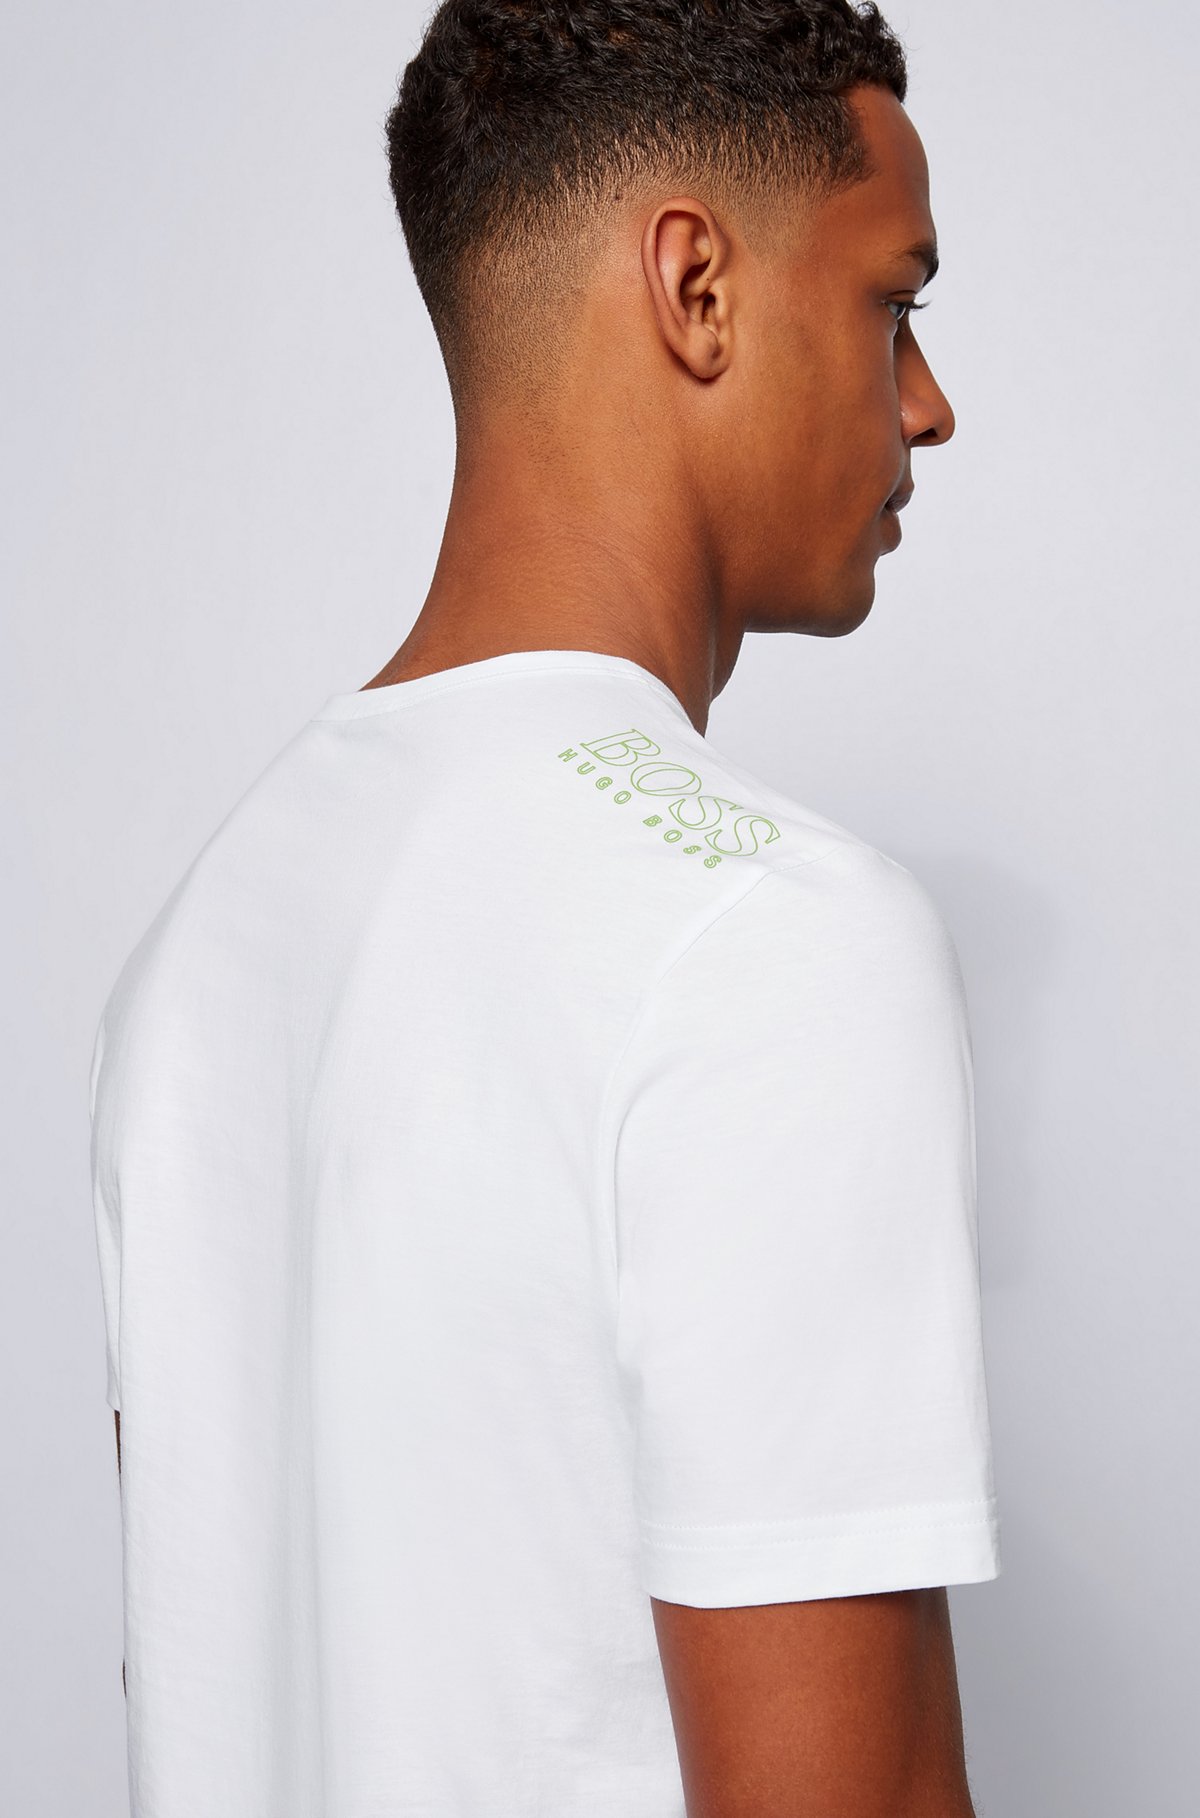 Regular-fit T-shirt with contrast detail, White